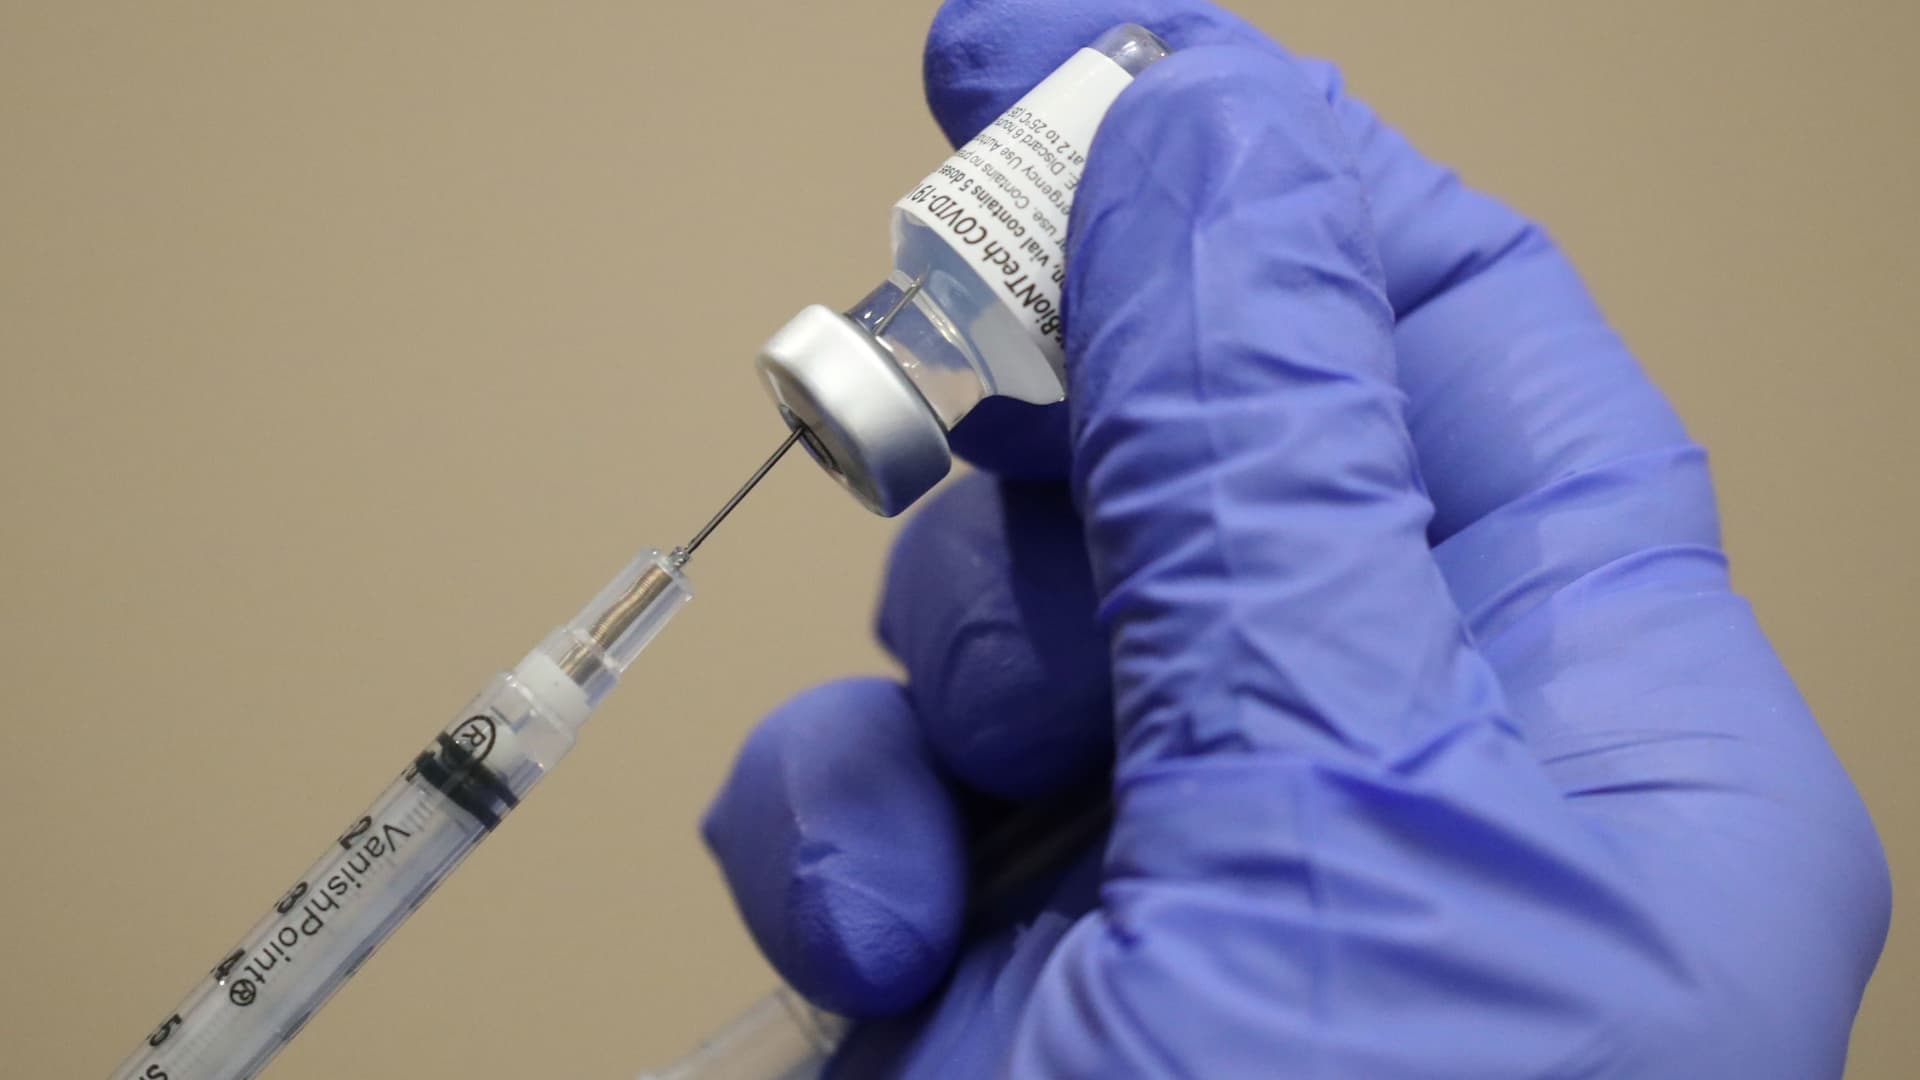 A healthcare worker draws the coronavirus disease (COVID-19) vaccine from a vial at Dignity Health Glendale Memorial Hospital and Health Center in Glendale, California, December 17, 2020.